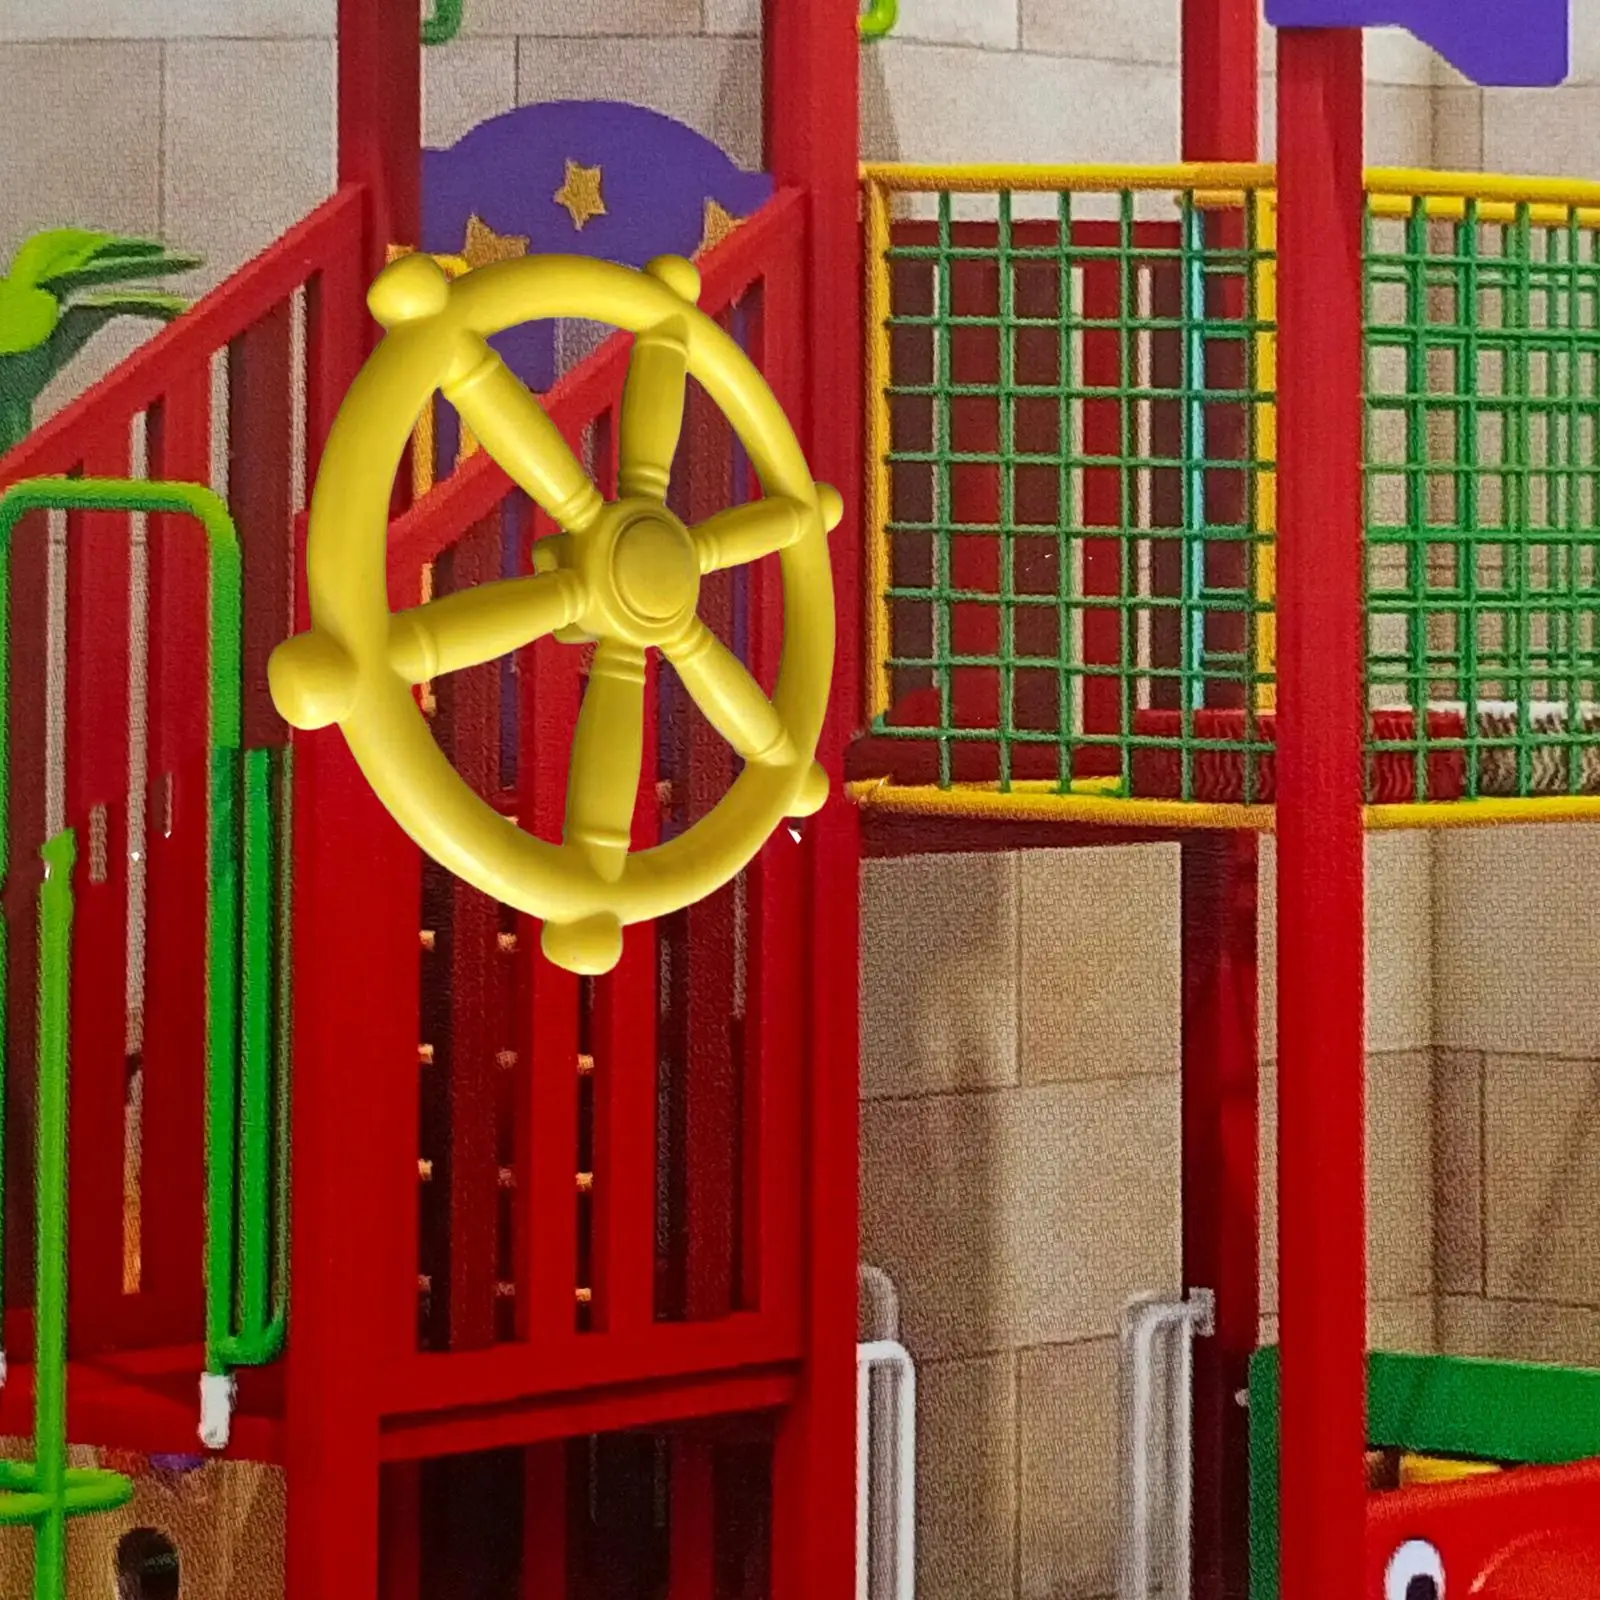 Pirate Ship Wheel with Screws Kids Steering Wheel Toy Playground Accessories for Park Play House Treehouse Garden Amusement Park